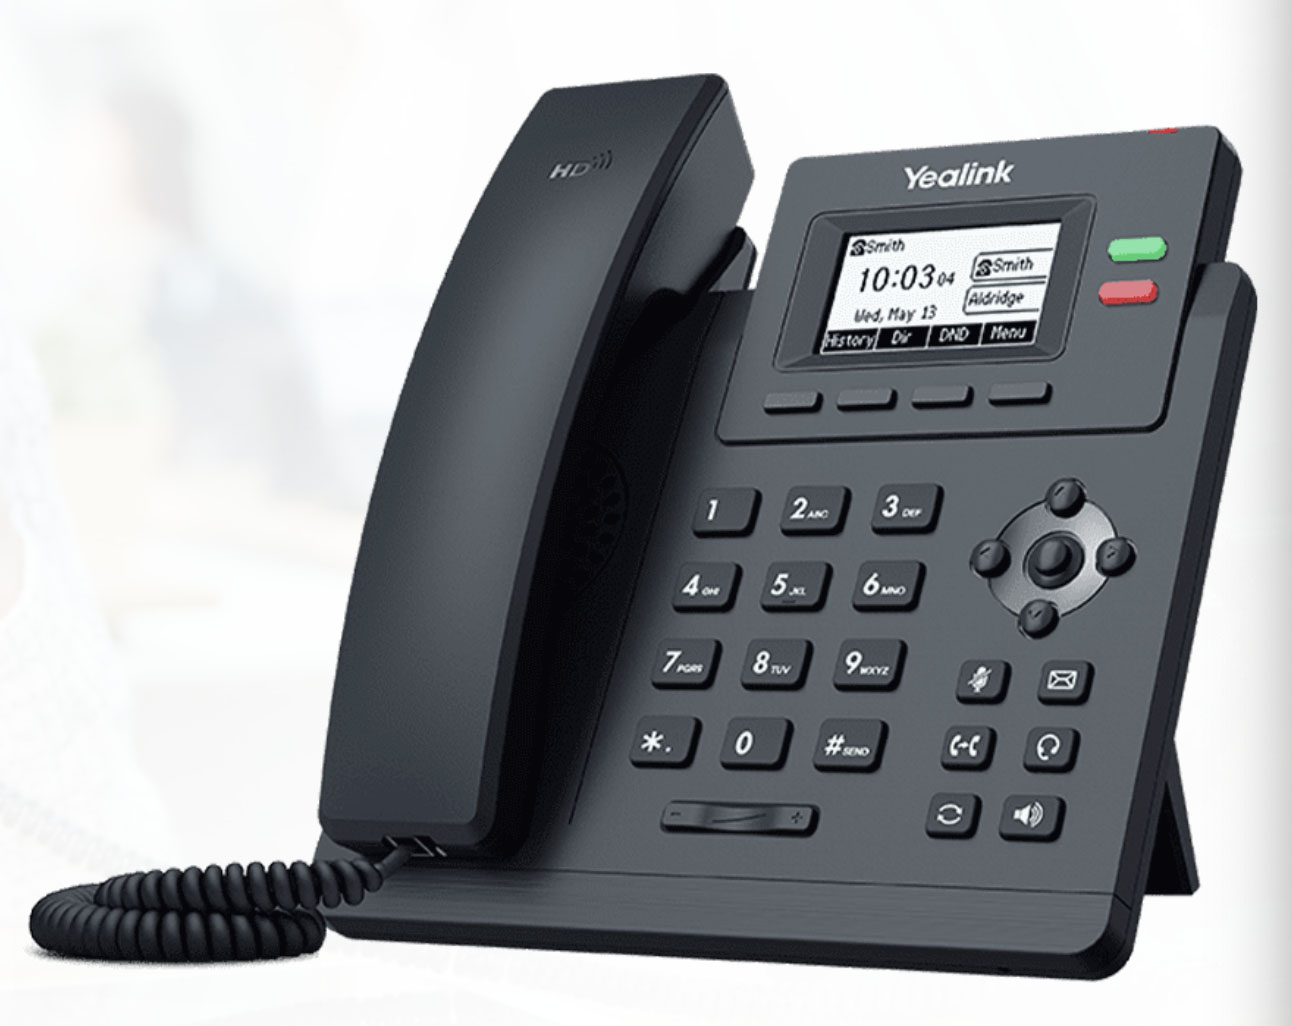 Yealink phone's classic business phone with an adjustable multi-angle stand.